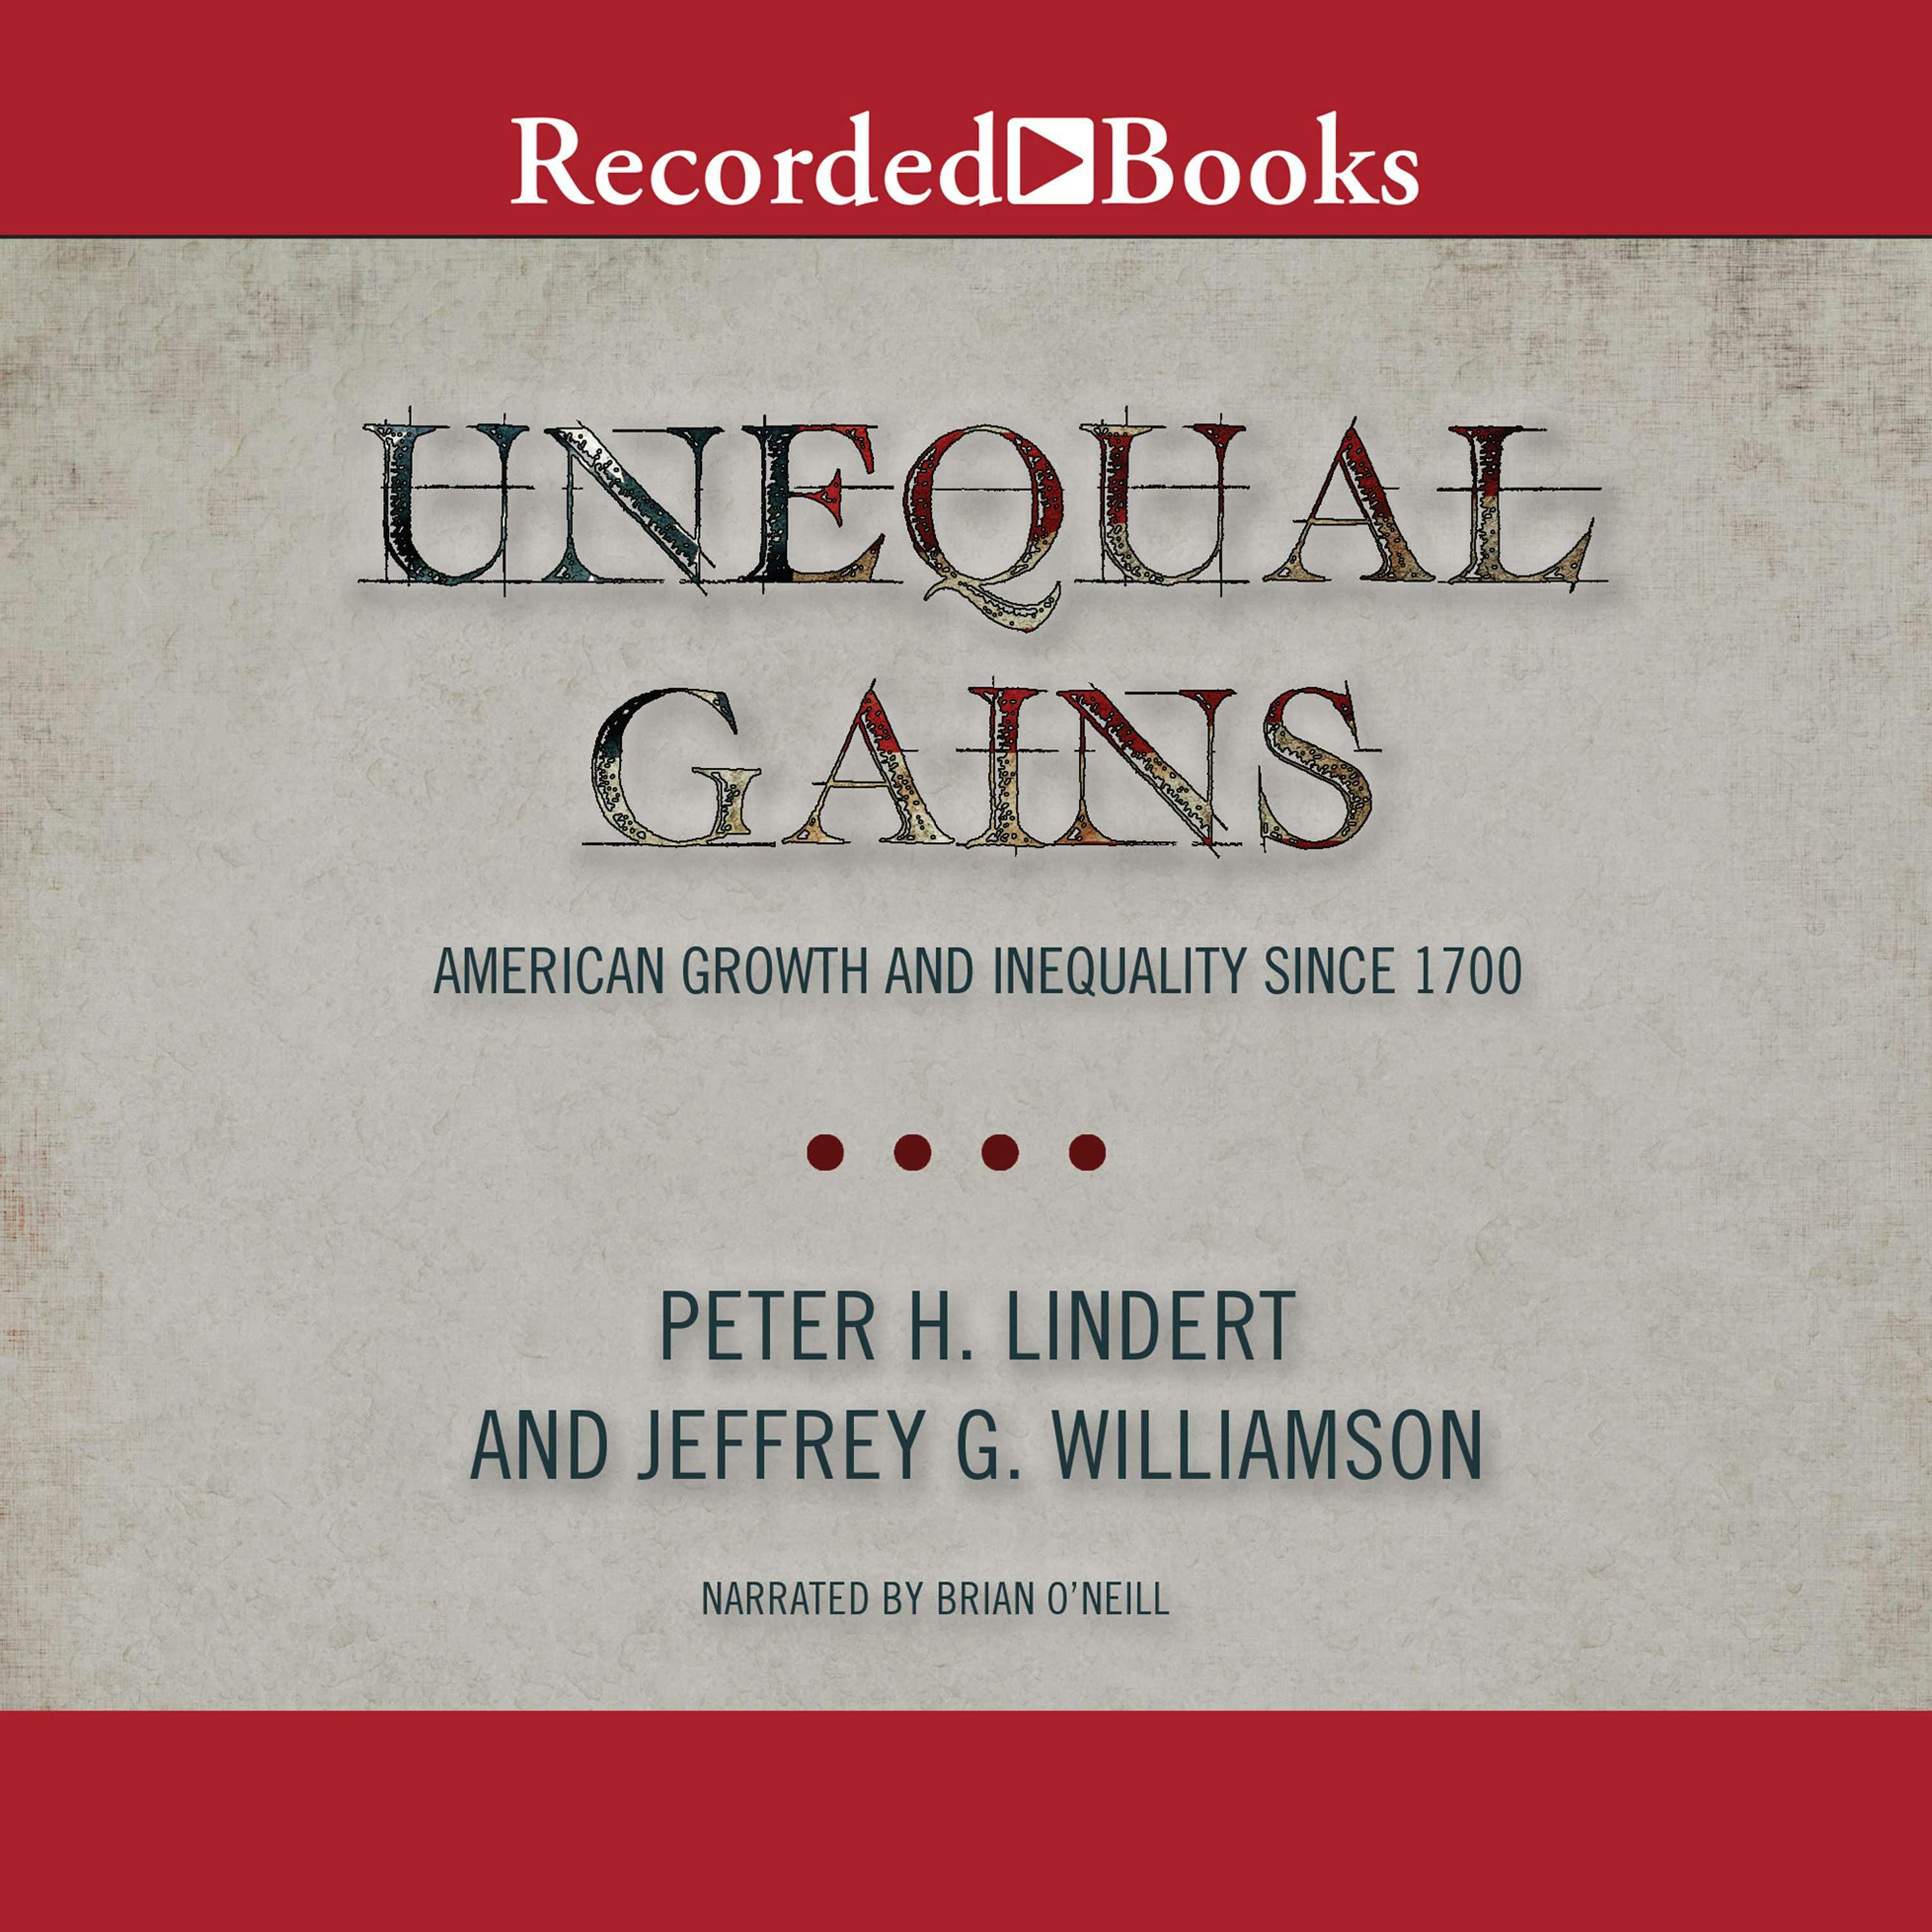 Unequal Gains: American Growth and Inequality Since 1700 - Peter H. Lindert, Jeffrey G. Williamson